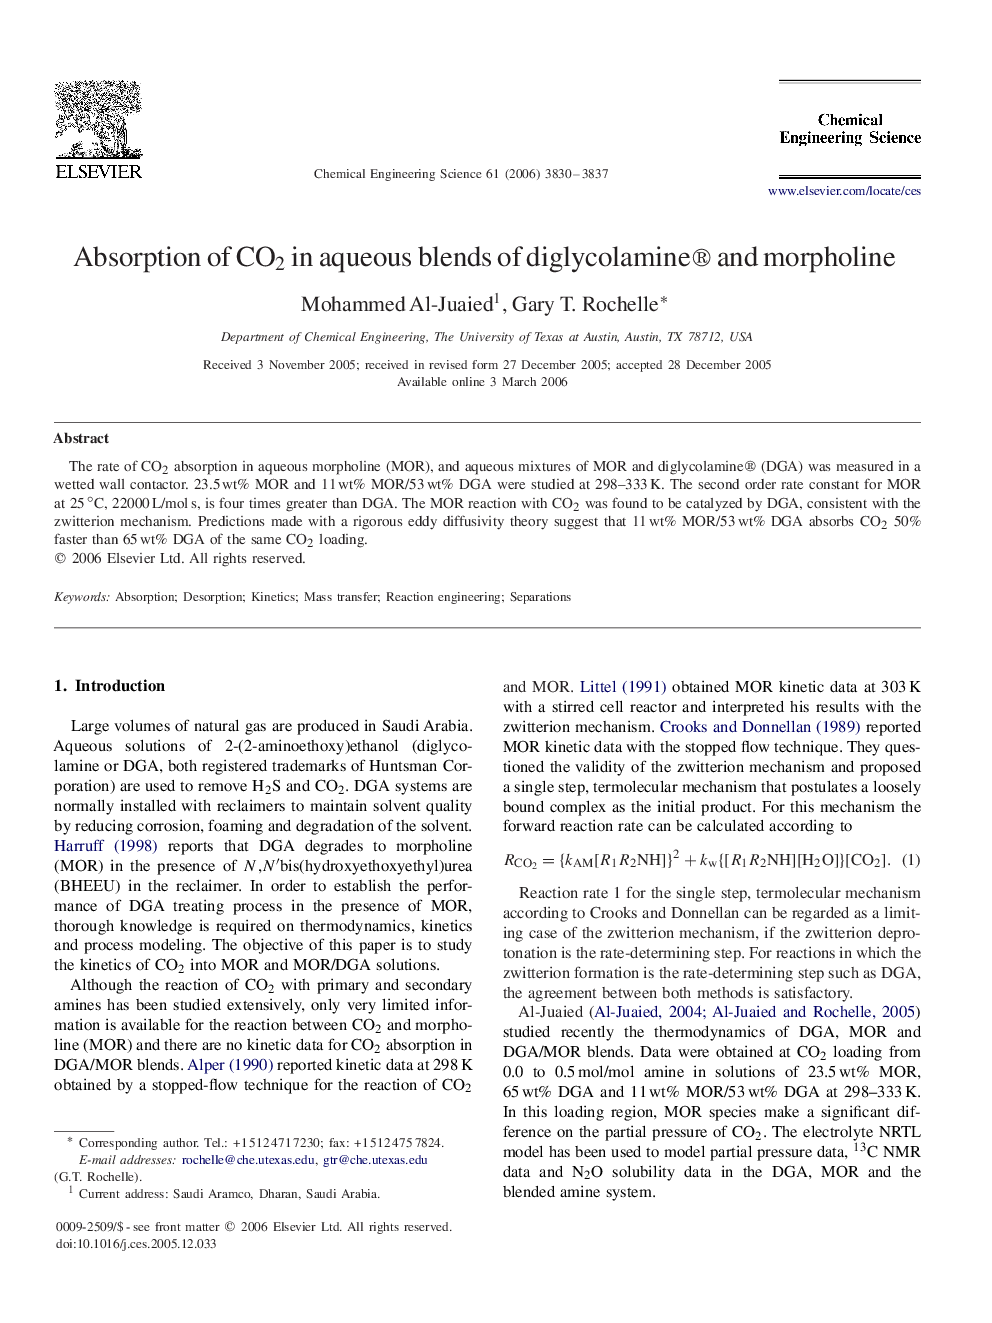 Absorption of CO2CO2 in aqueous blends of diglycolamine®® and morpholine